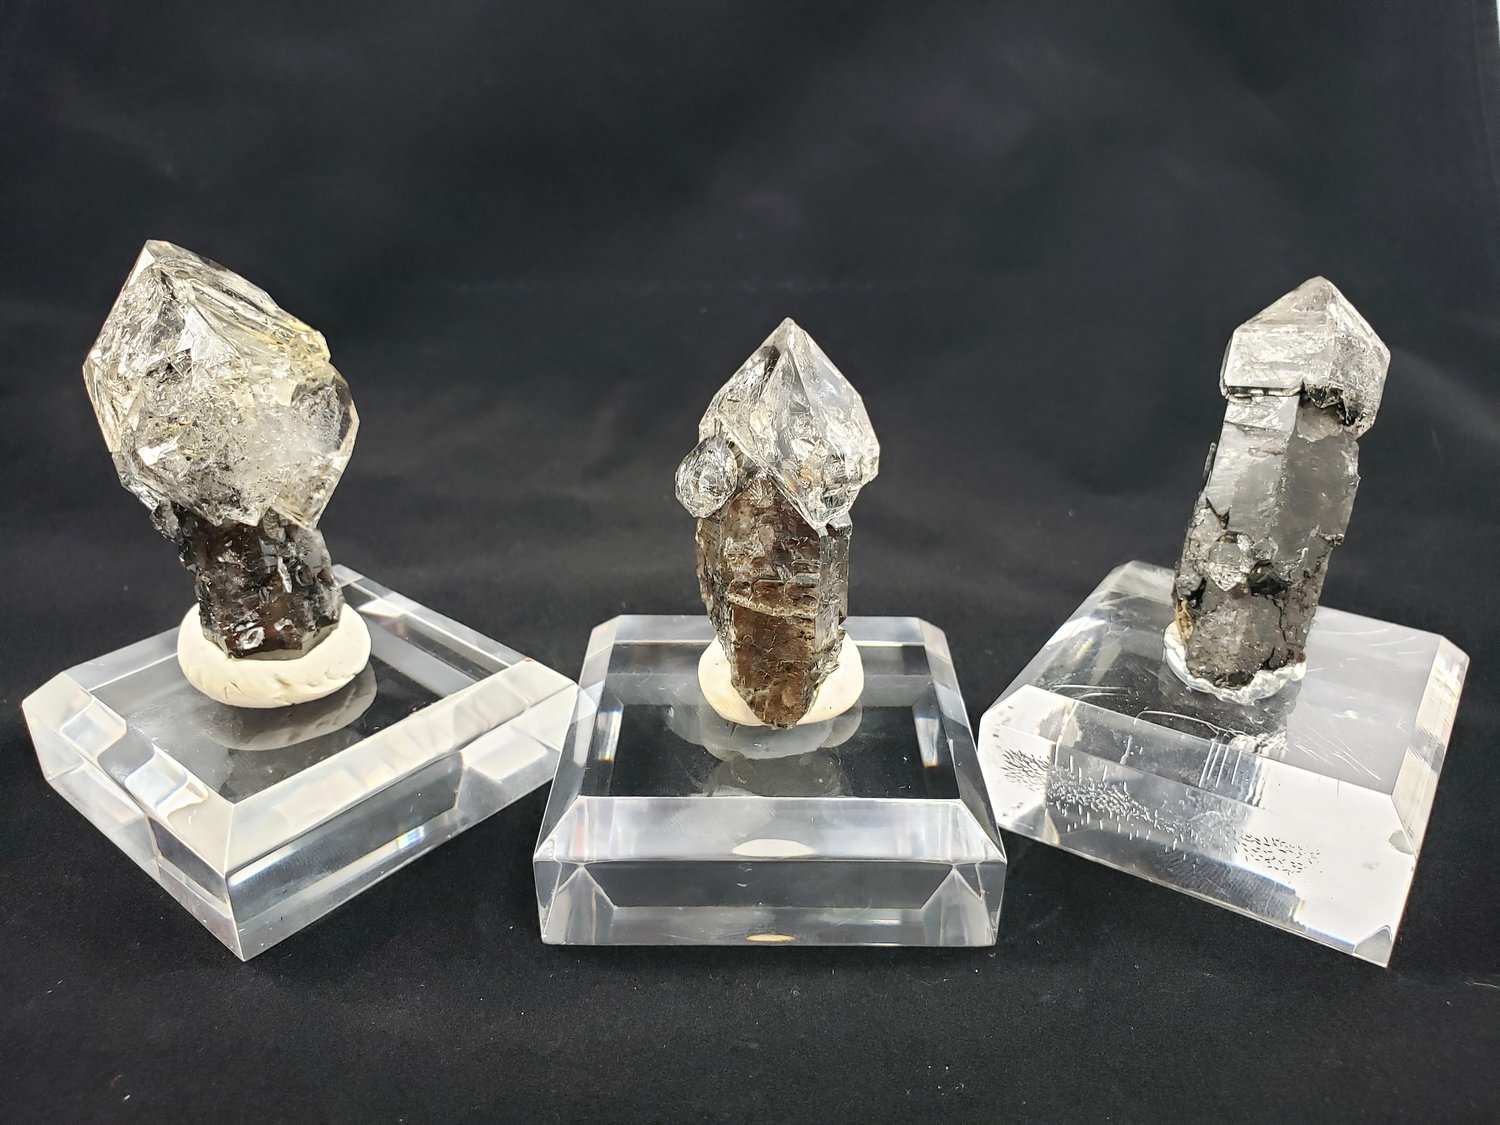 Rare Herkimer Diamond quartz crystal formations, including black-stemmed scepters, can be found at Diamond Mountain Mining in Little Falls.